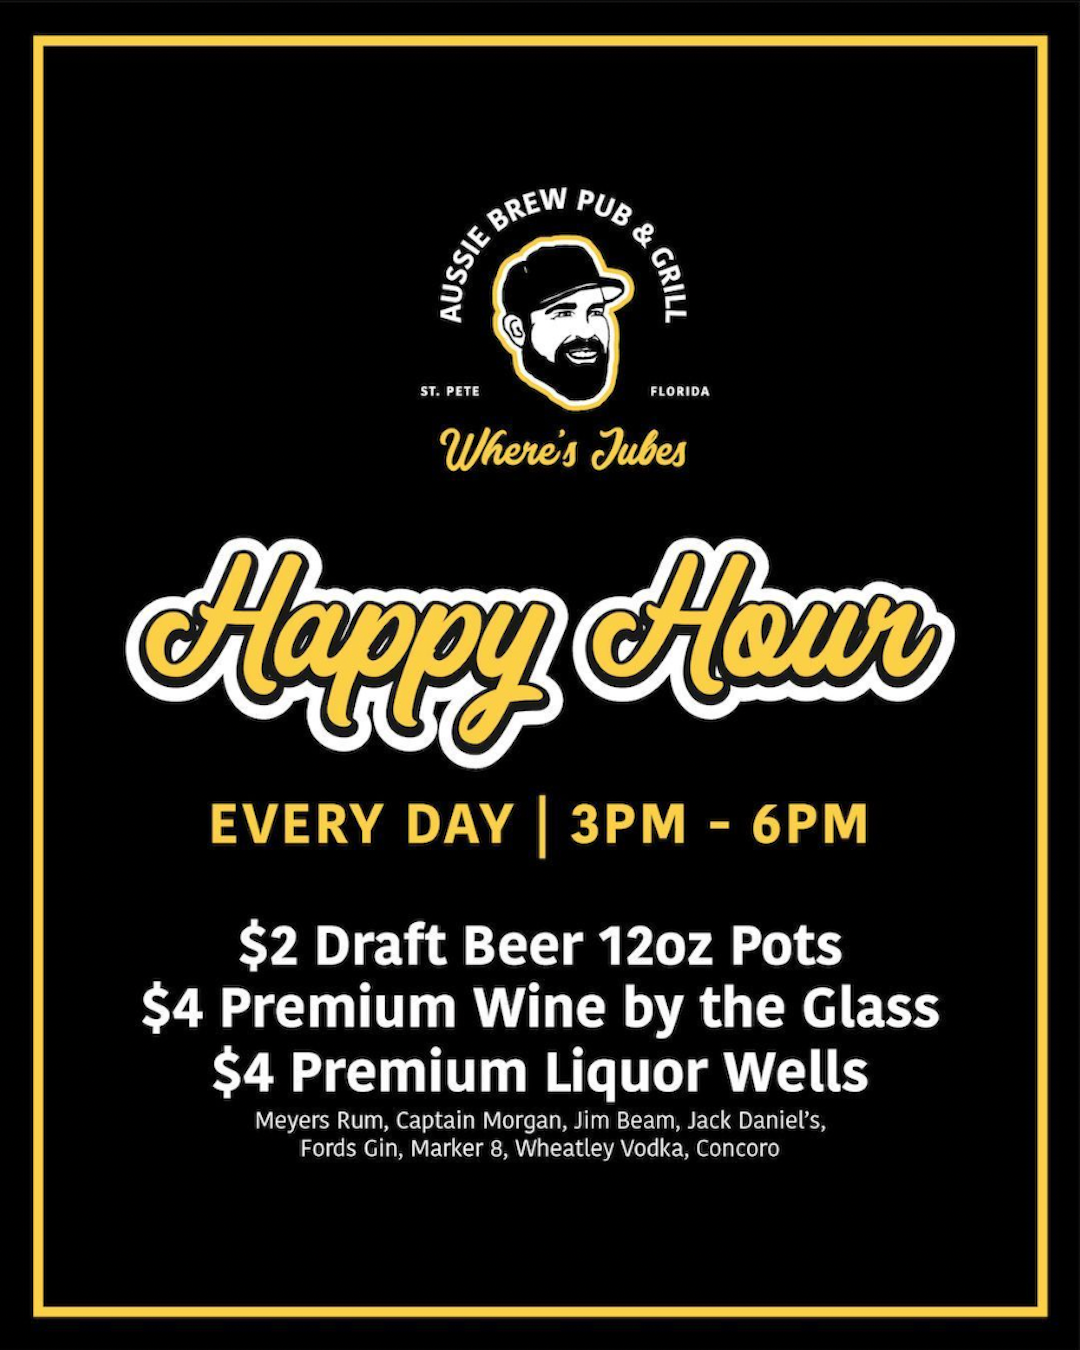 Happy Hour pricing at brewpub in downtown st petersburg Where's Jubes